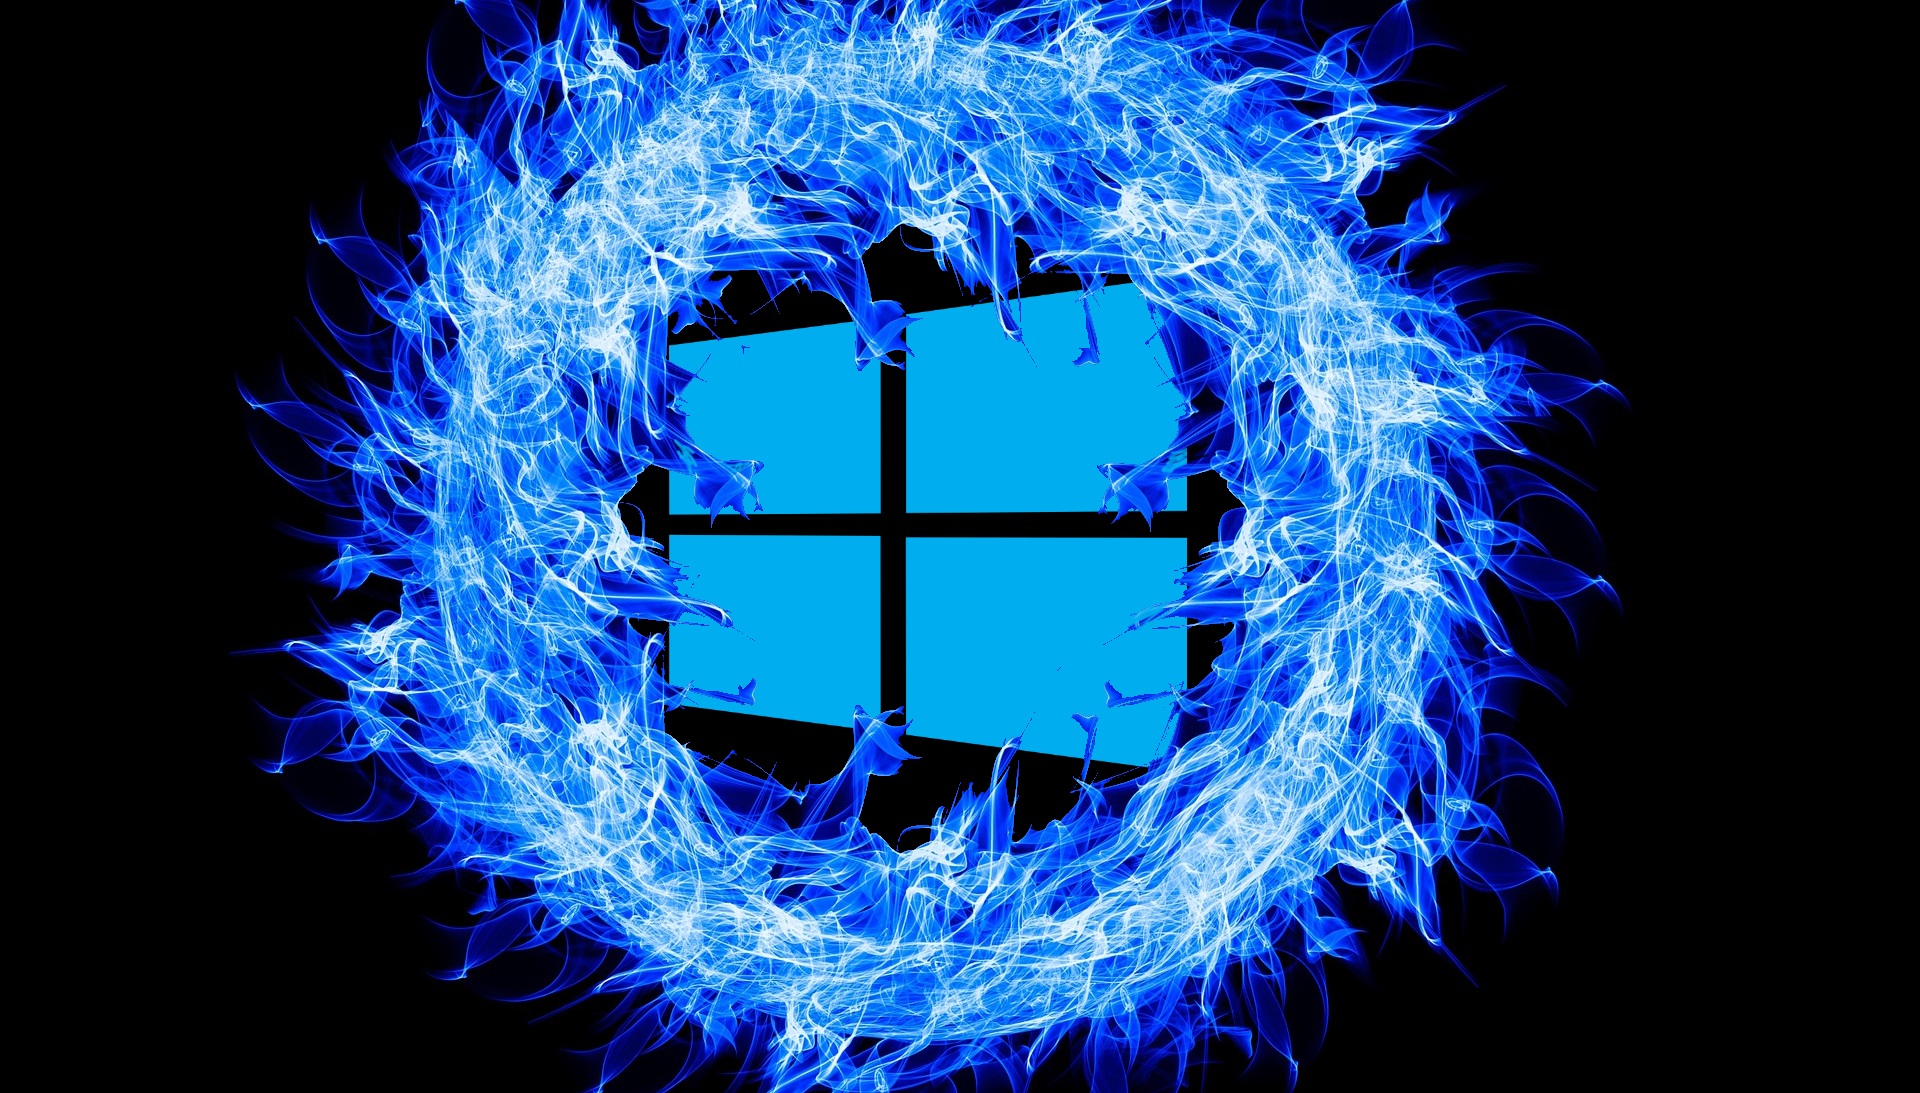 Kết quả hình ảnh cho Windows 10 problems are ruining Microsoft’s reputation – and the damage can’t be understated